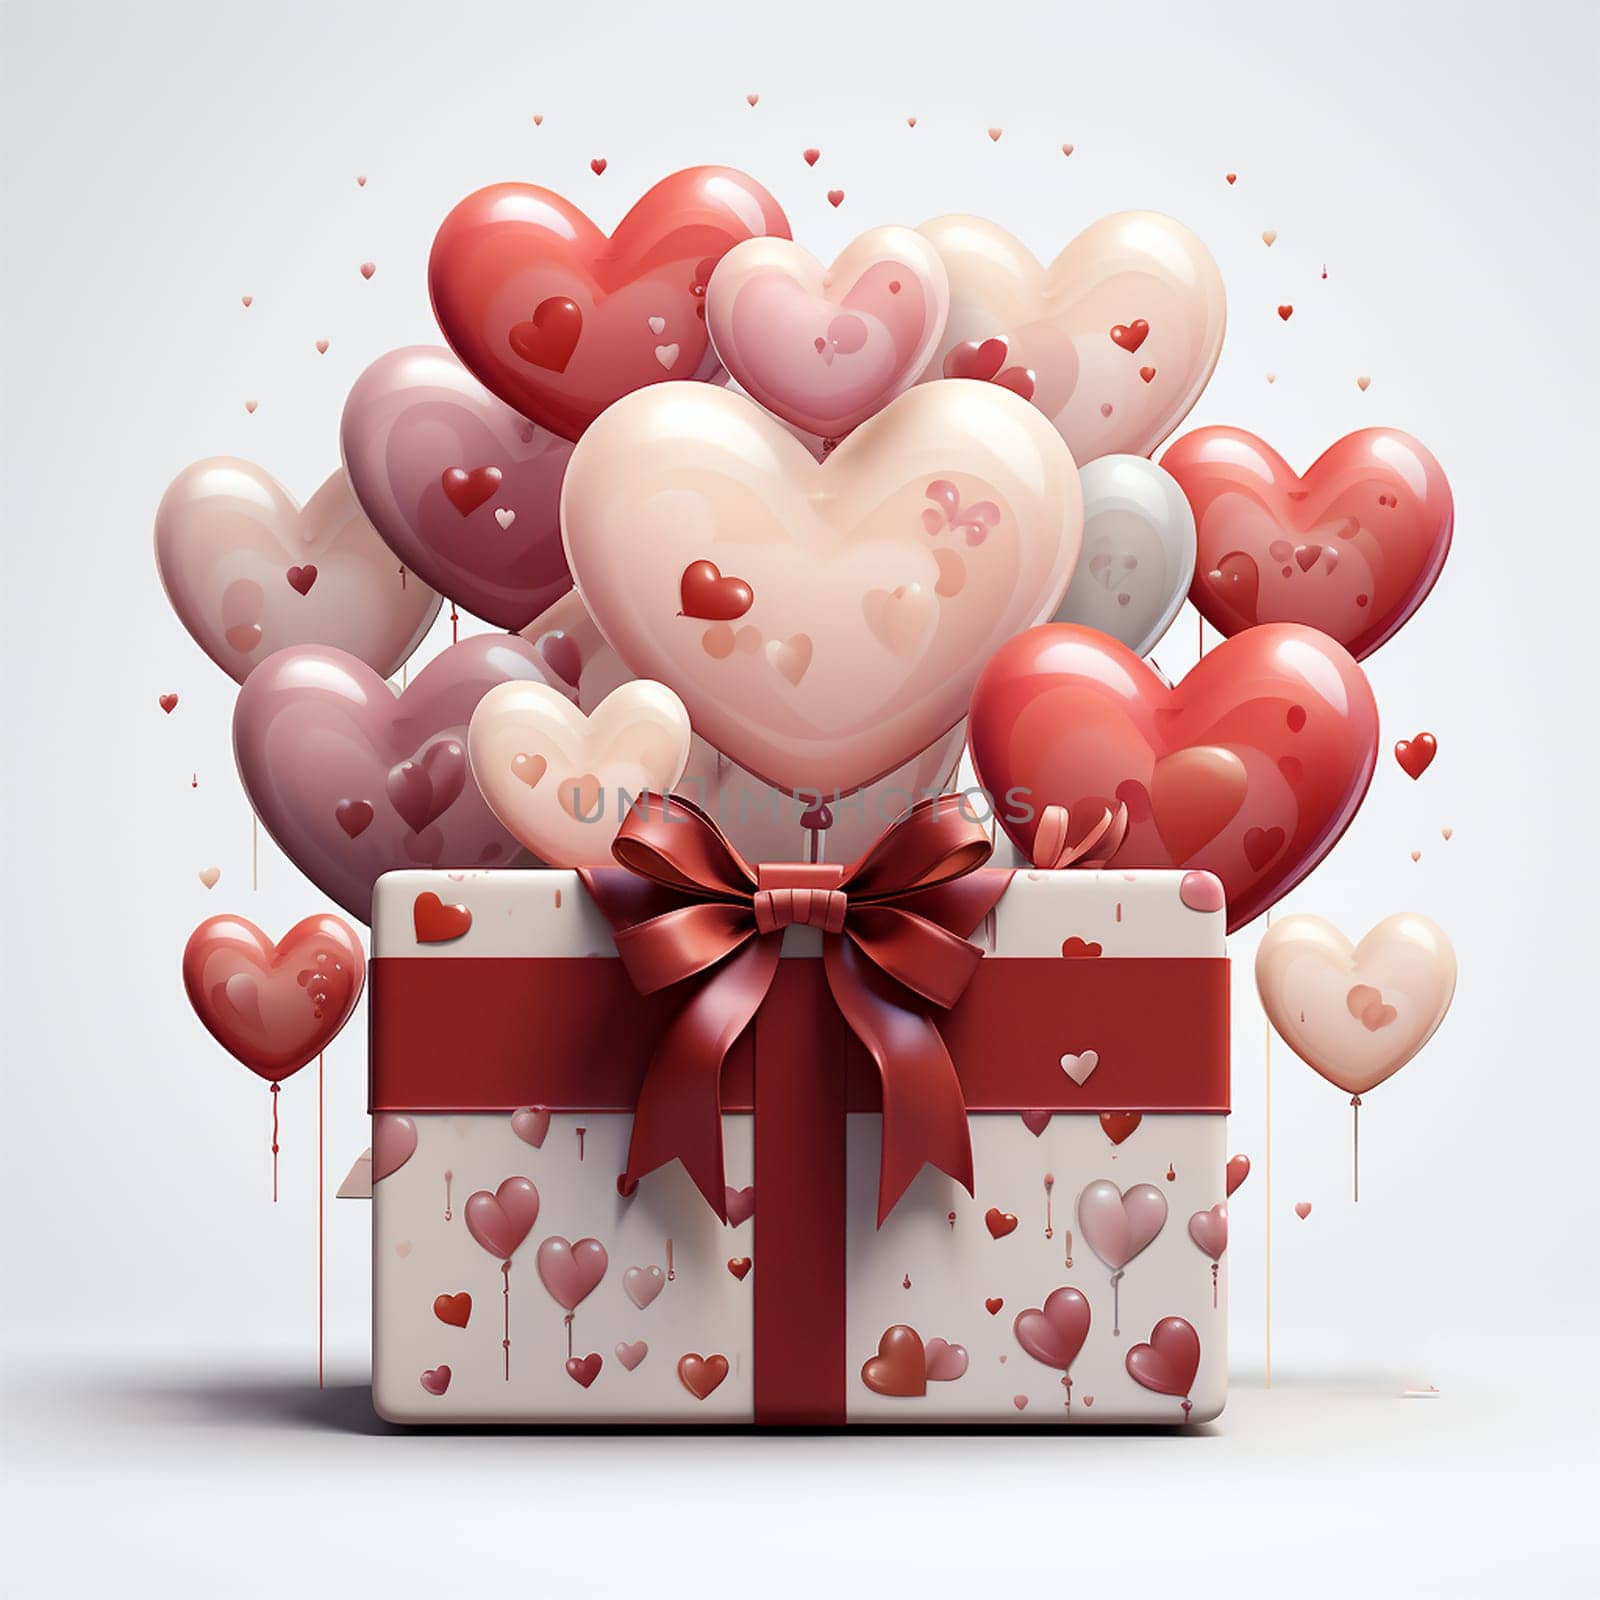 Valentine's day design. Realistic 3d pink gifts boxes. Open gift box full of decorative festive object. Holiday banner, web poster, flyer, stylish brochure, greeting card, cover. Romantic background Valentine's Day concept by Annebel146